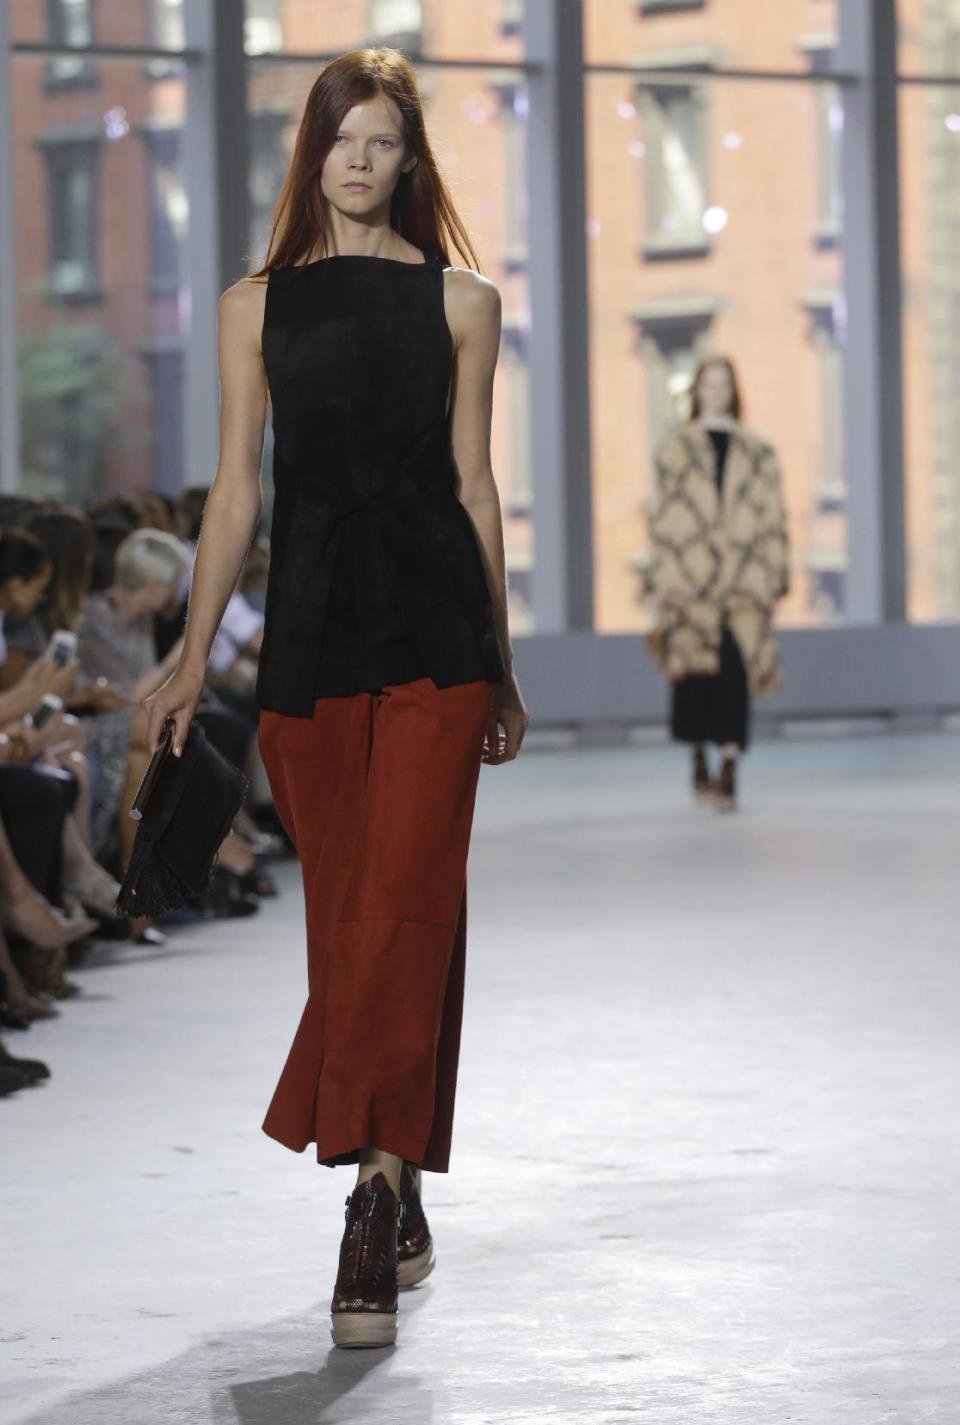 The Proenza Schouler Spring 2014 collection is modeled during Fashion Week in New York, Wednesday, Sept. 11, 2013. (AP Photo/Seth Wenig)